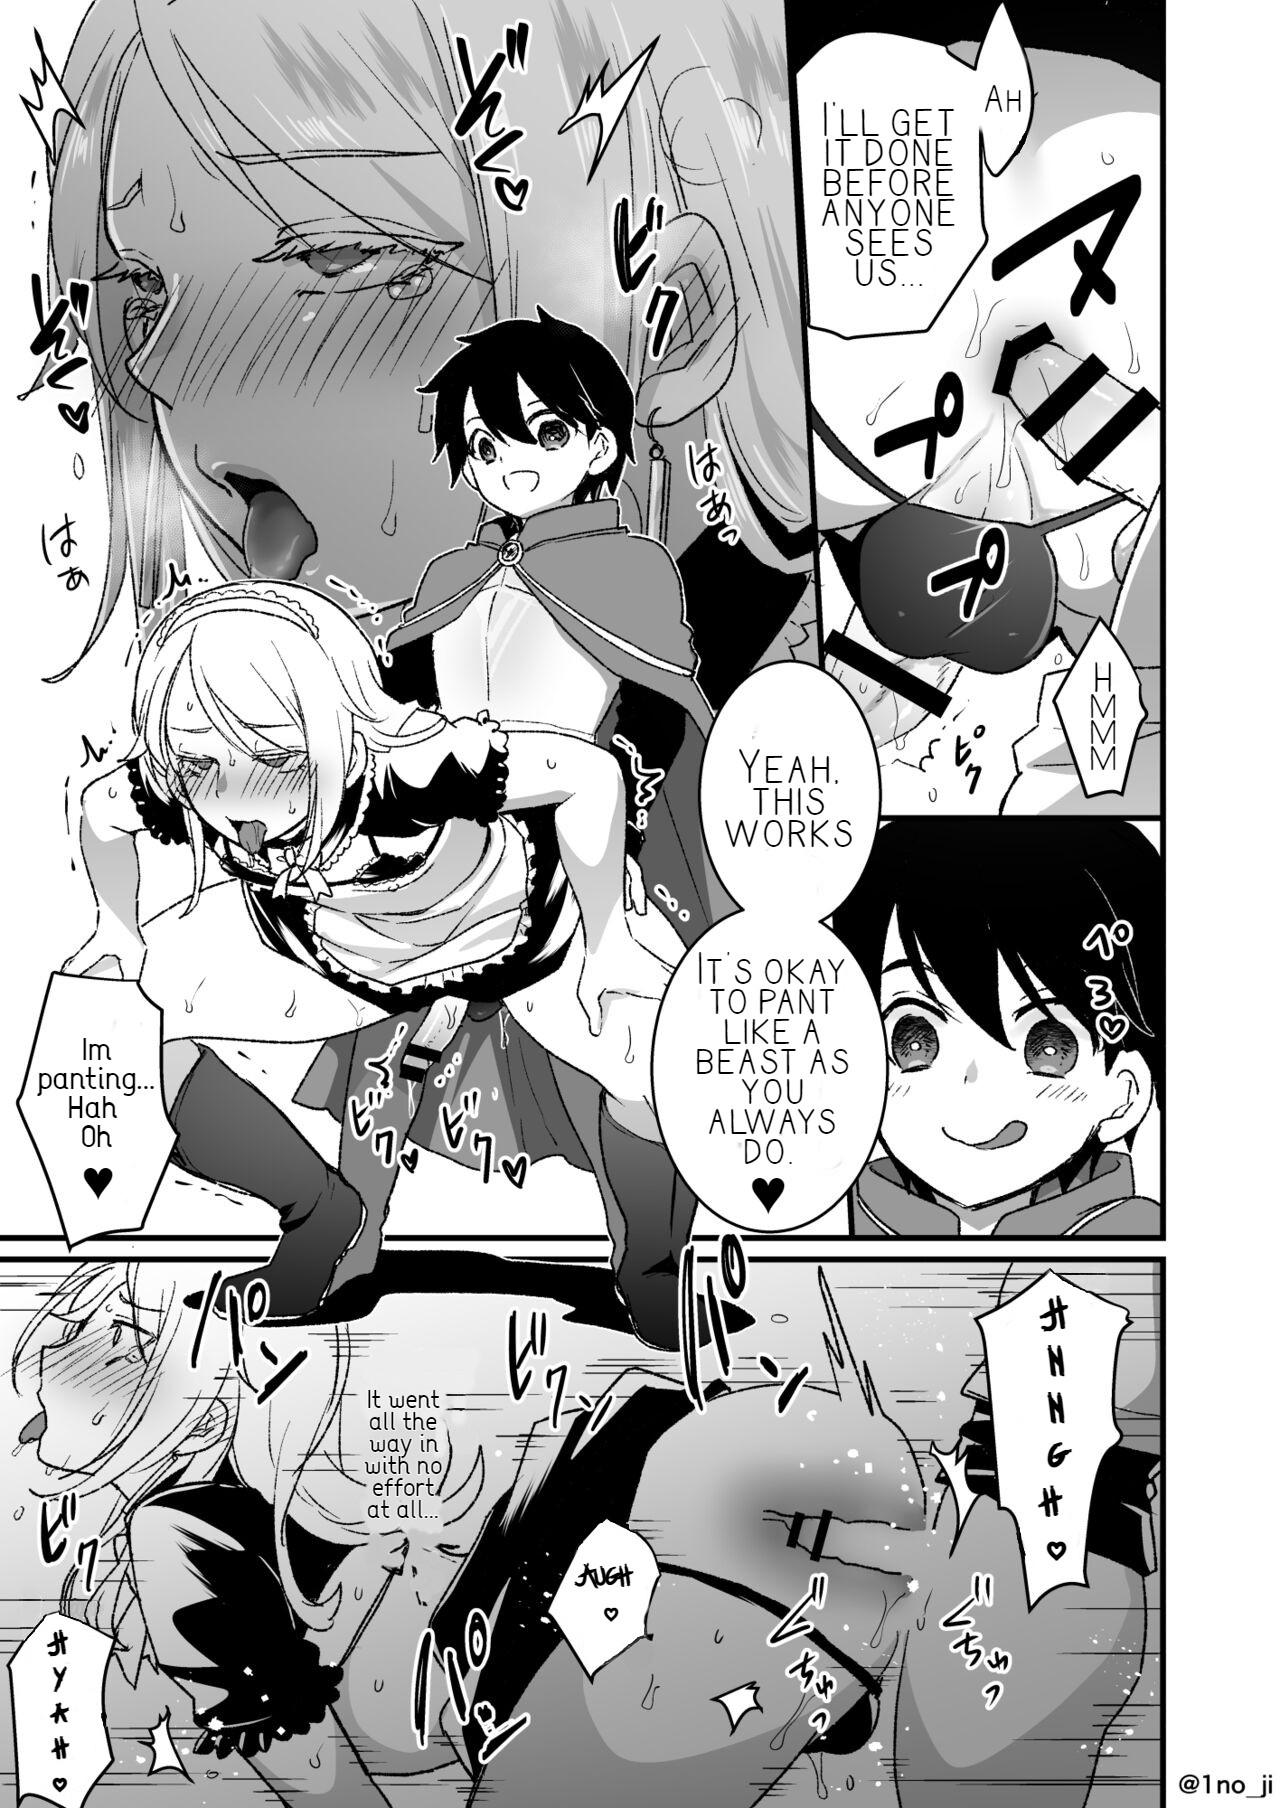 Manga of the Strongest Shota and the Strong and Beautiful Onii-san 2 2